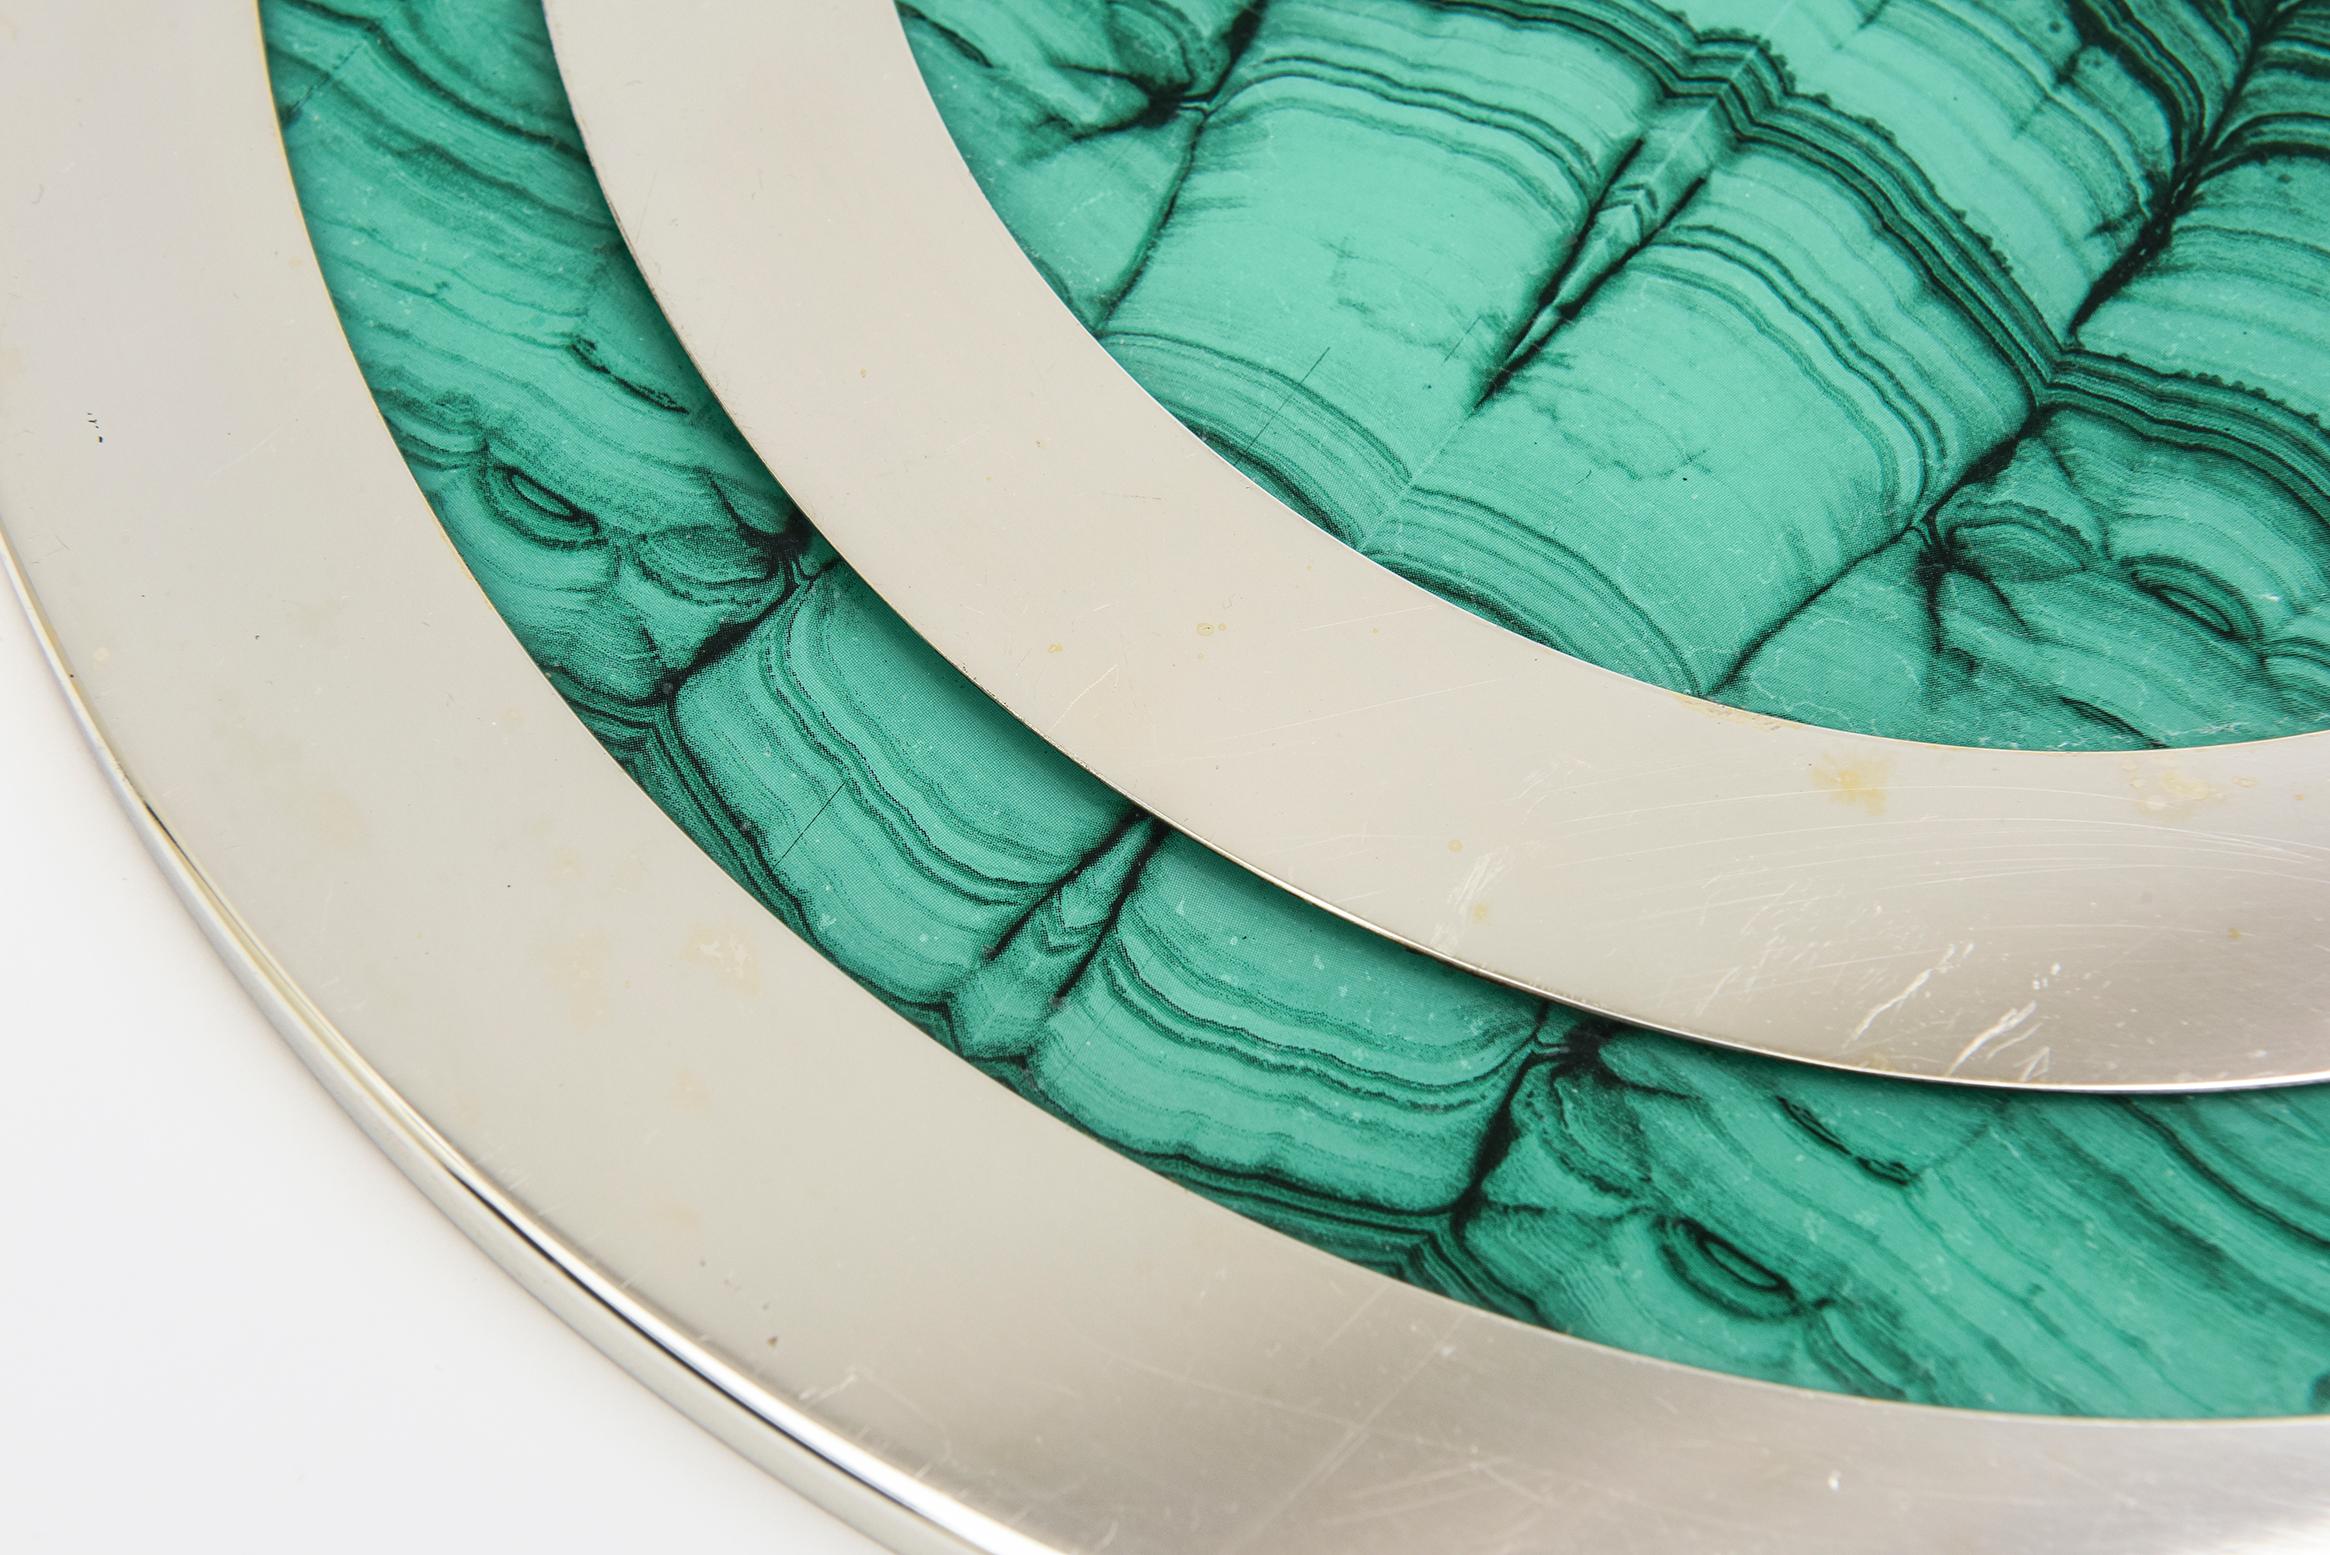  Vintage Malachite, Wood and Chrome Round Tray Barware For Sale 3